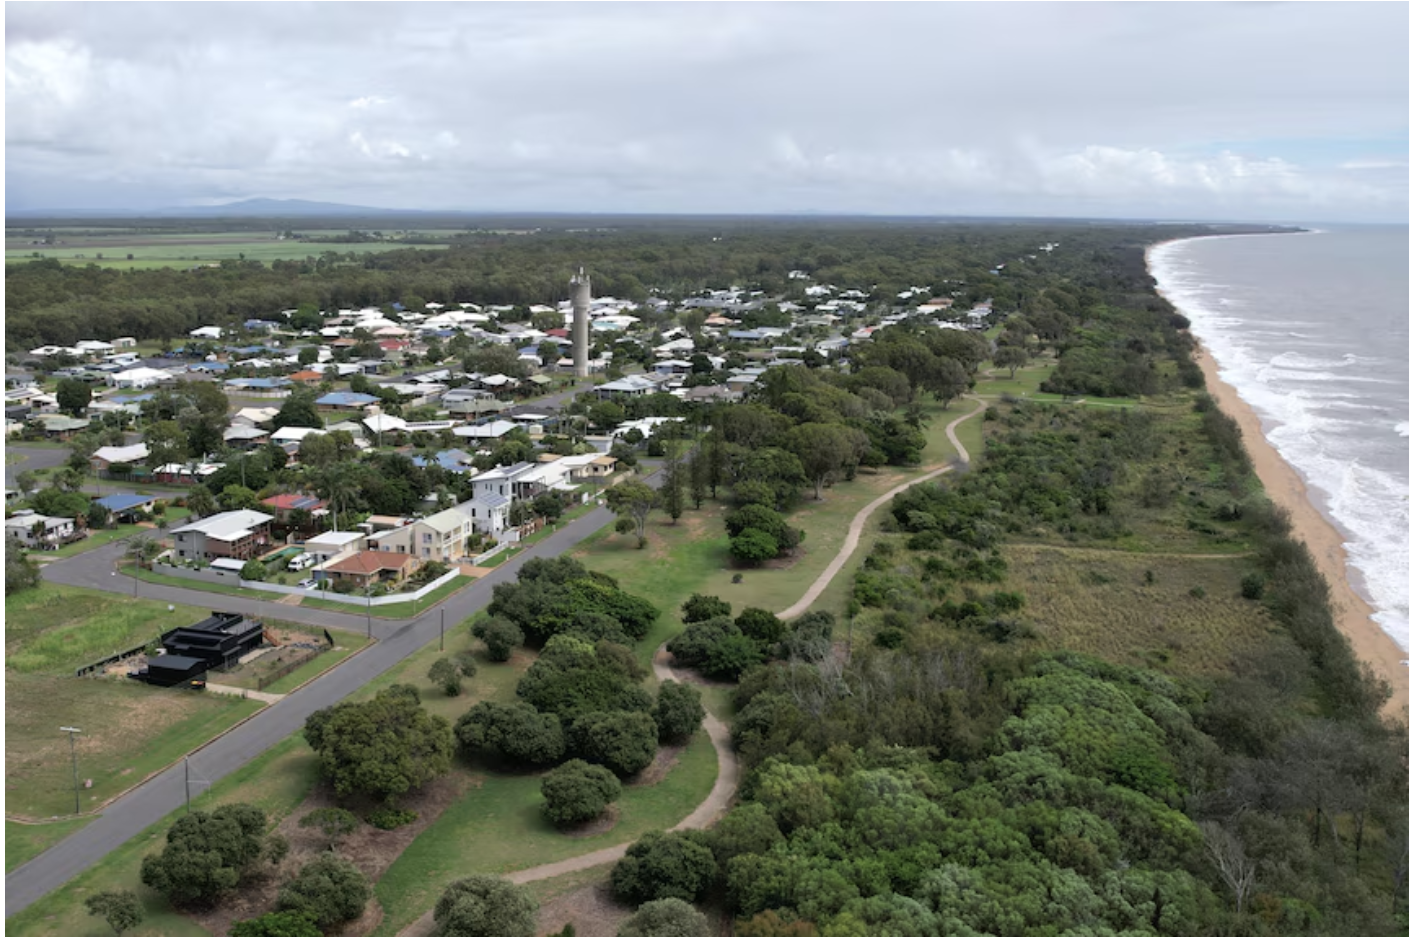 Southerners flock to regional Queensland’s beachside towns in search of the next property hotspot